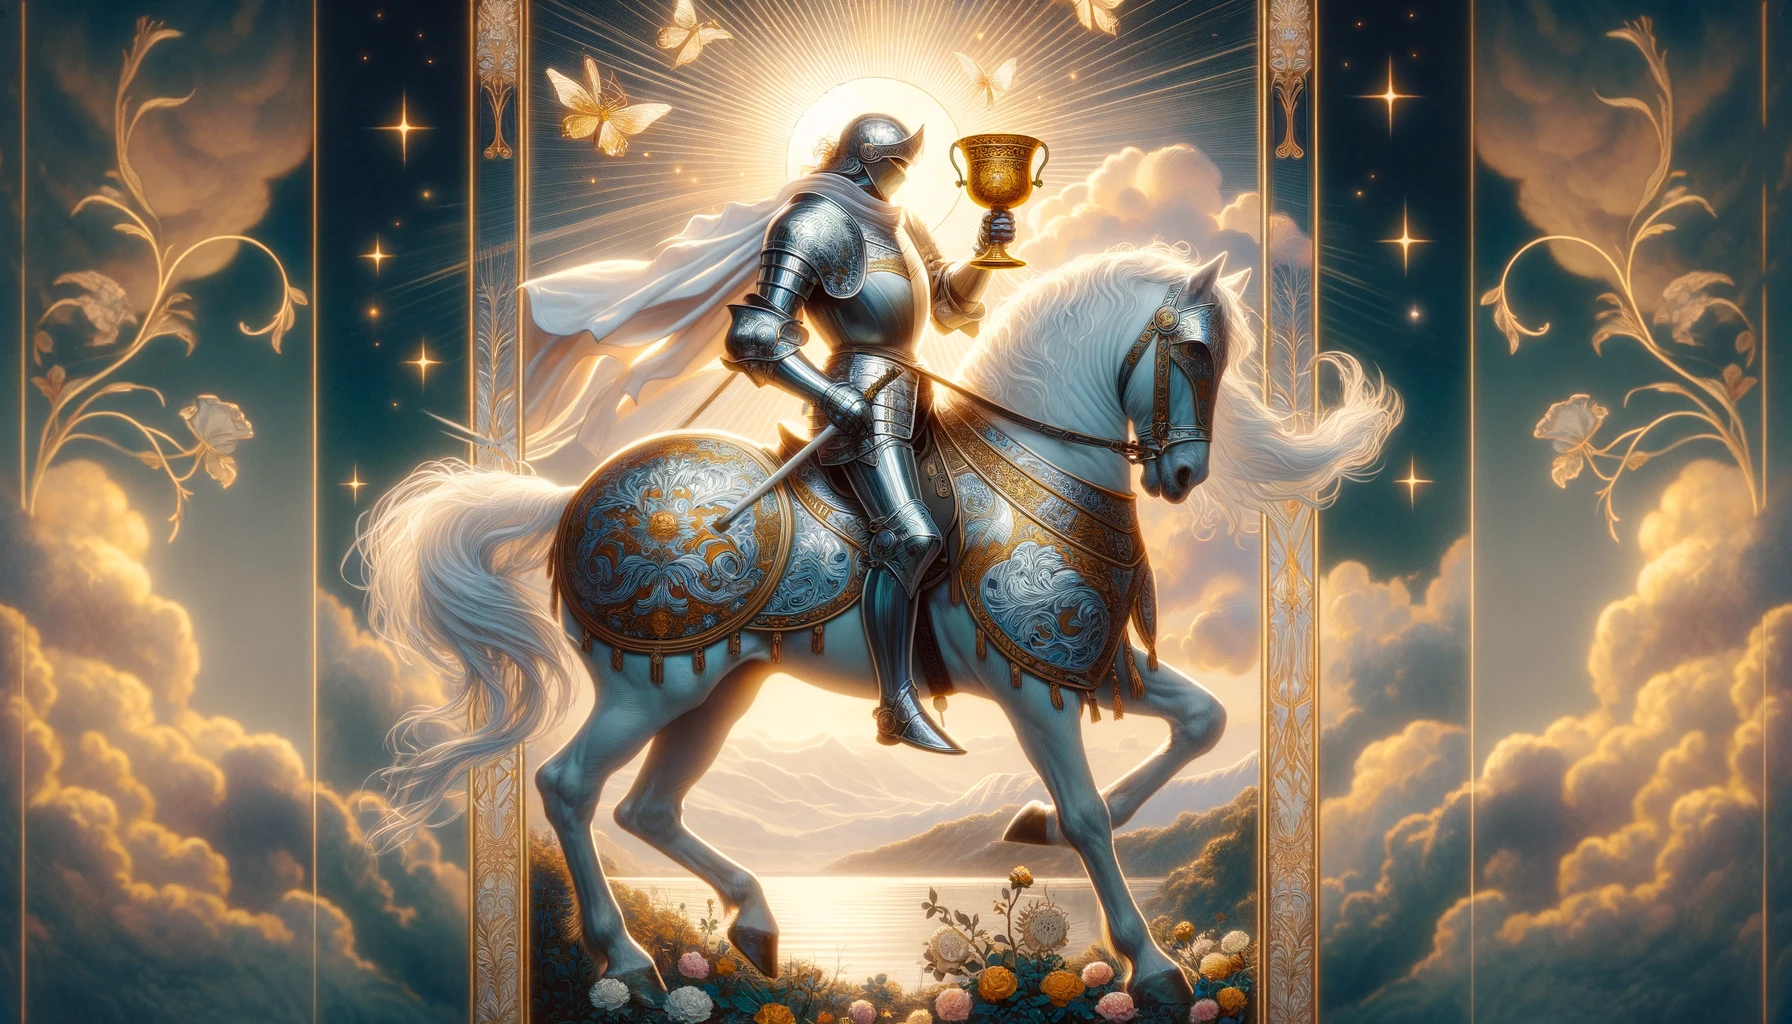 An image showcasing the mesmerizing Knight of Cups tarot card displaying a knight in shining armor riding gallantly on a white horse while holding